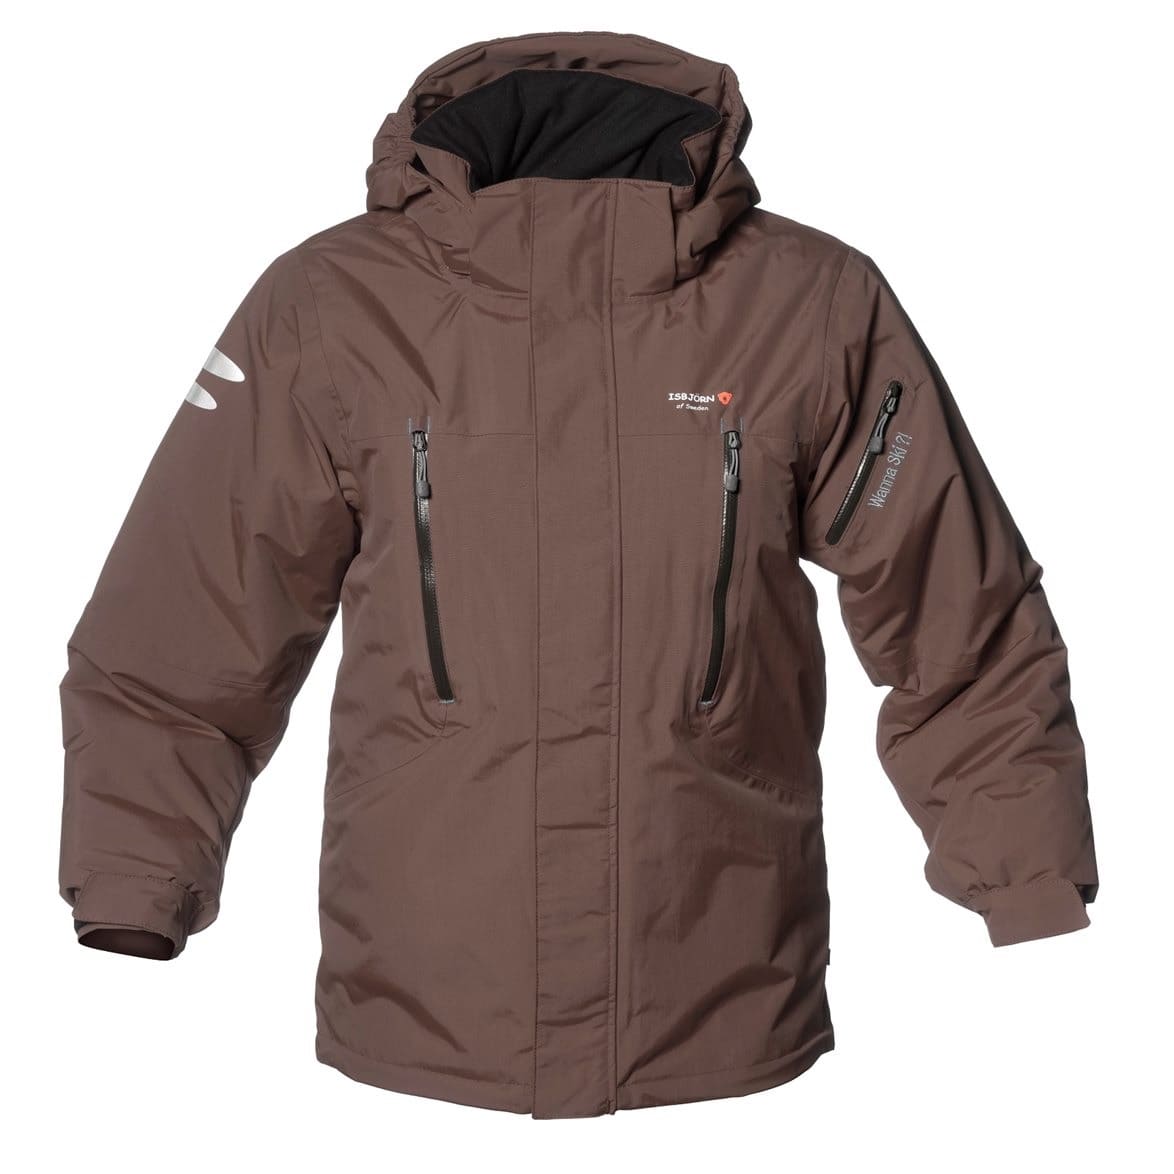 Buy Isbjörn Of Sweden Helicopter Ski Jacket From Outnorth